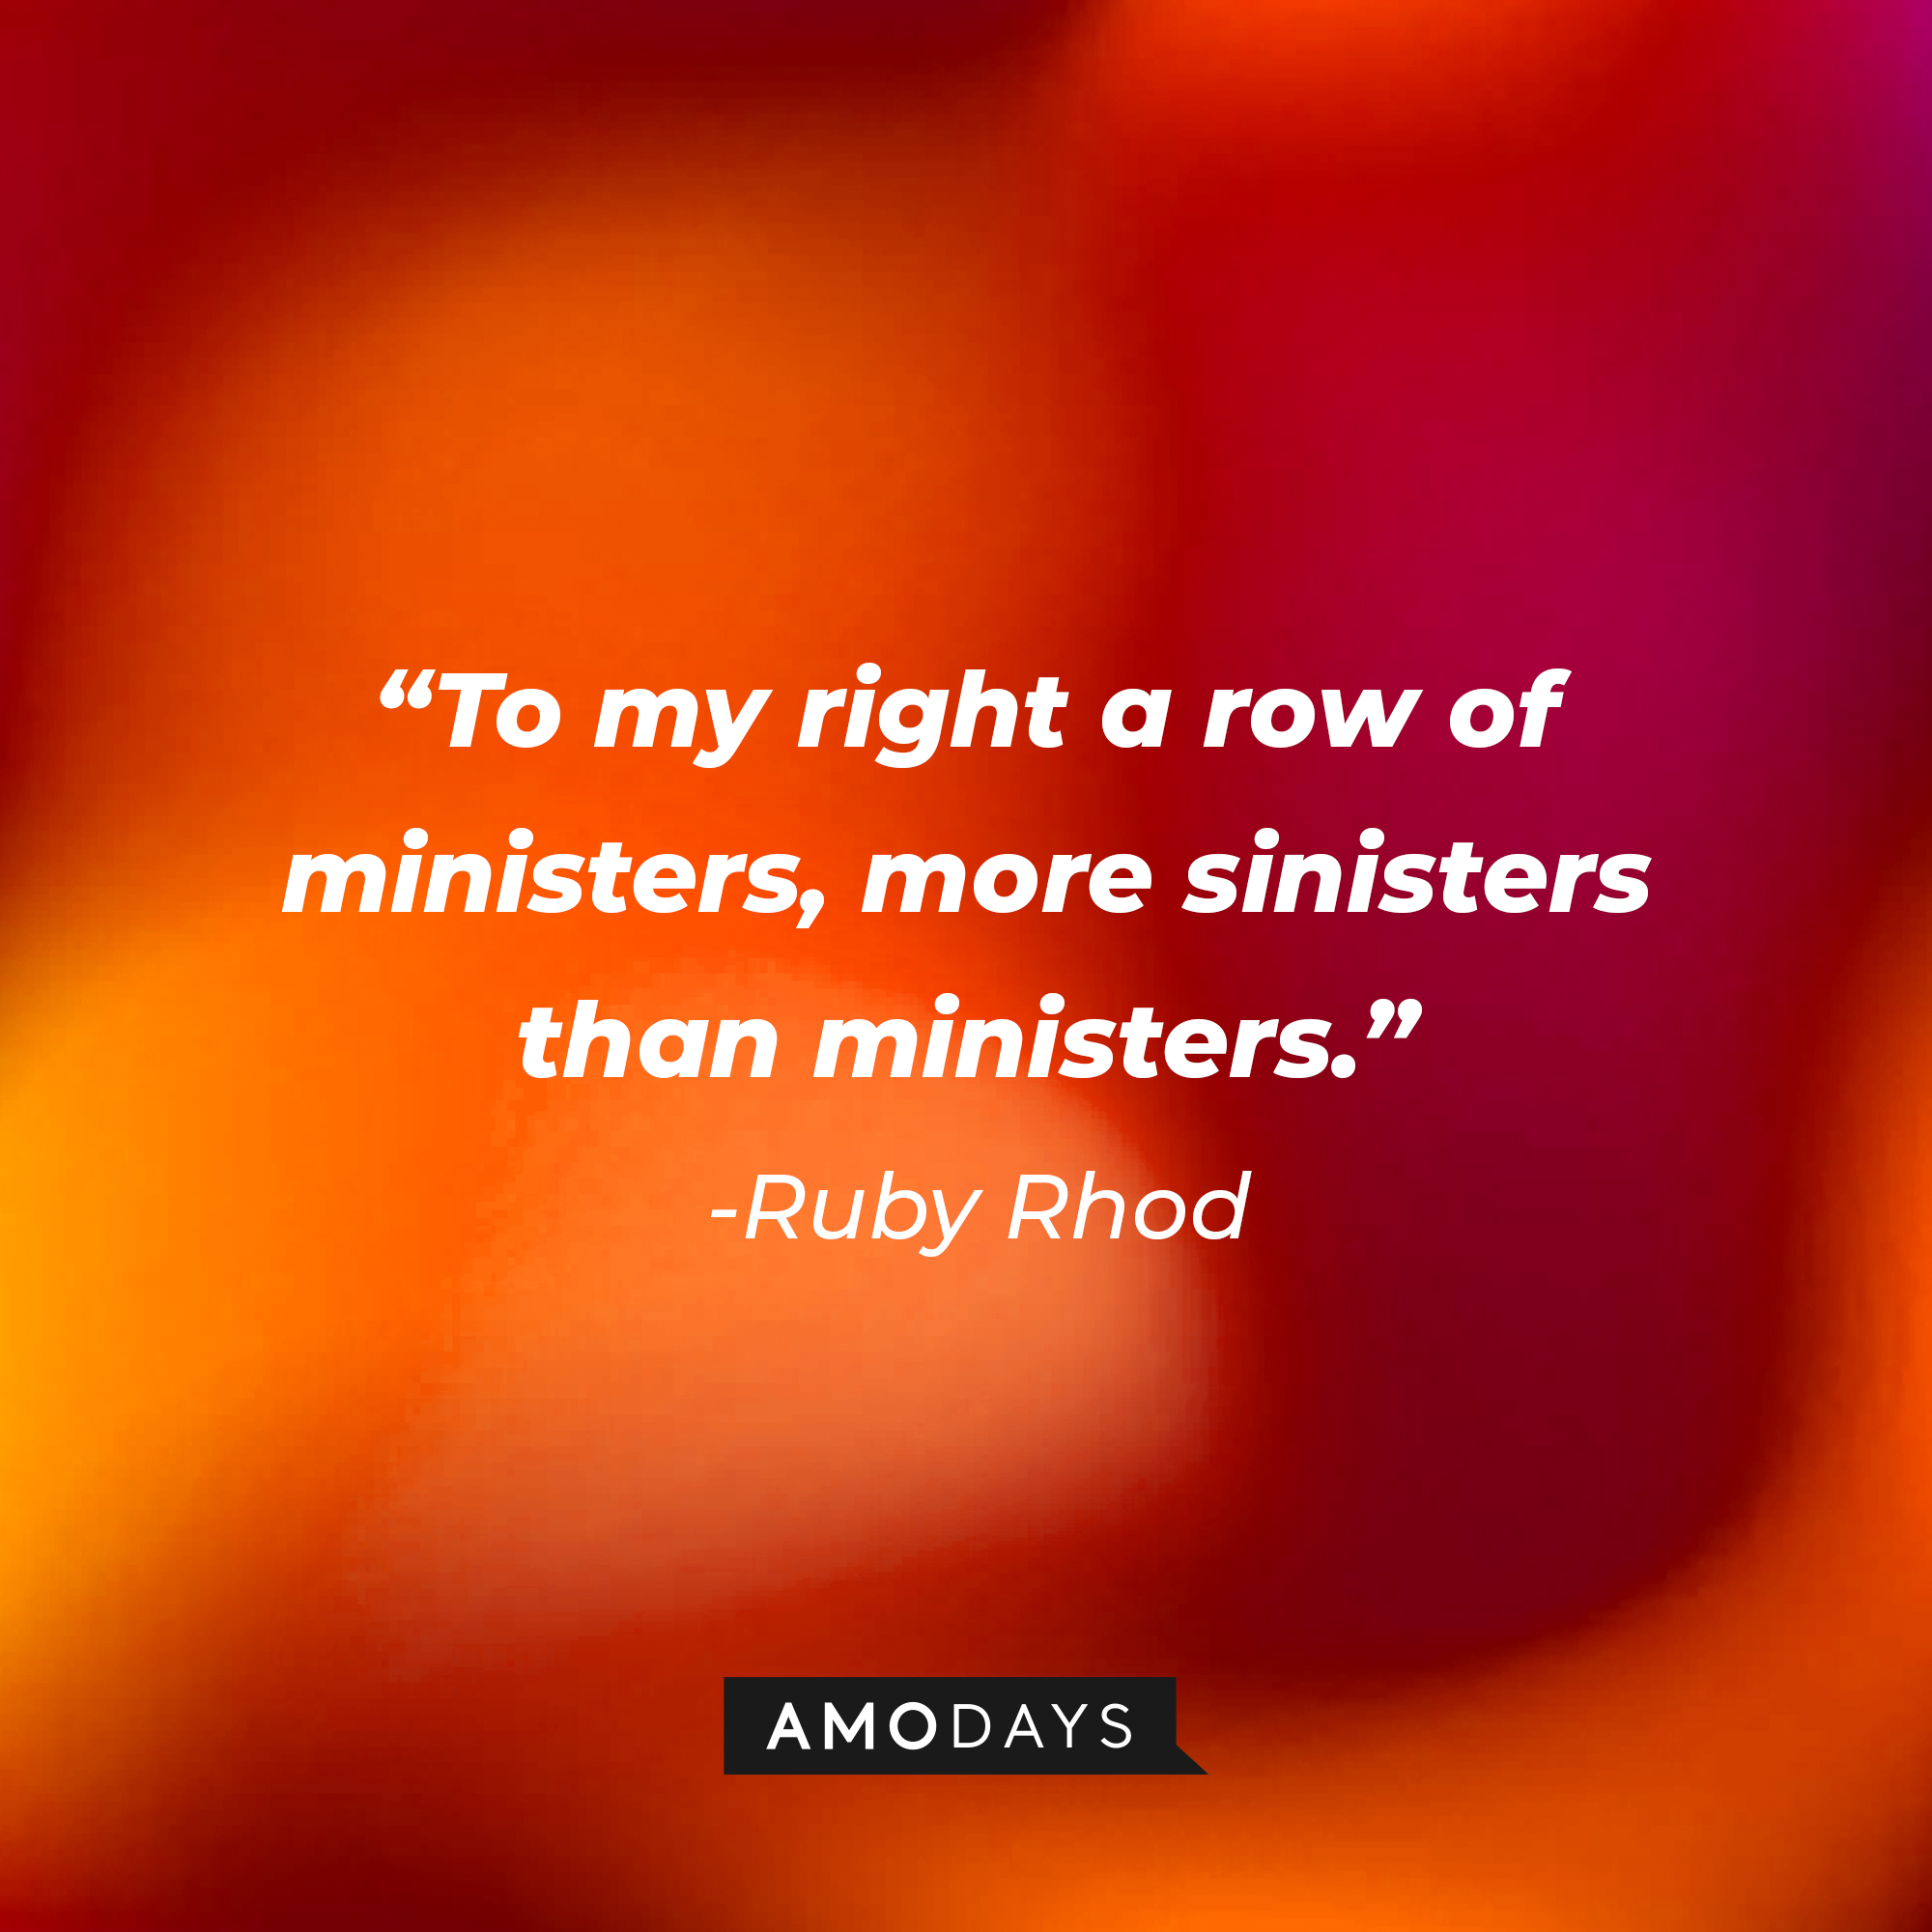 A photo with the quote, "To my right a row of ministers, more sinisters than ministers.” | Source: Amodays